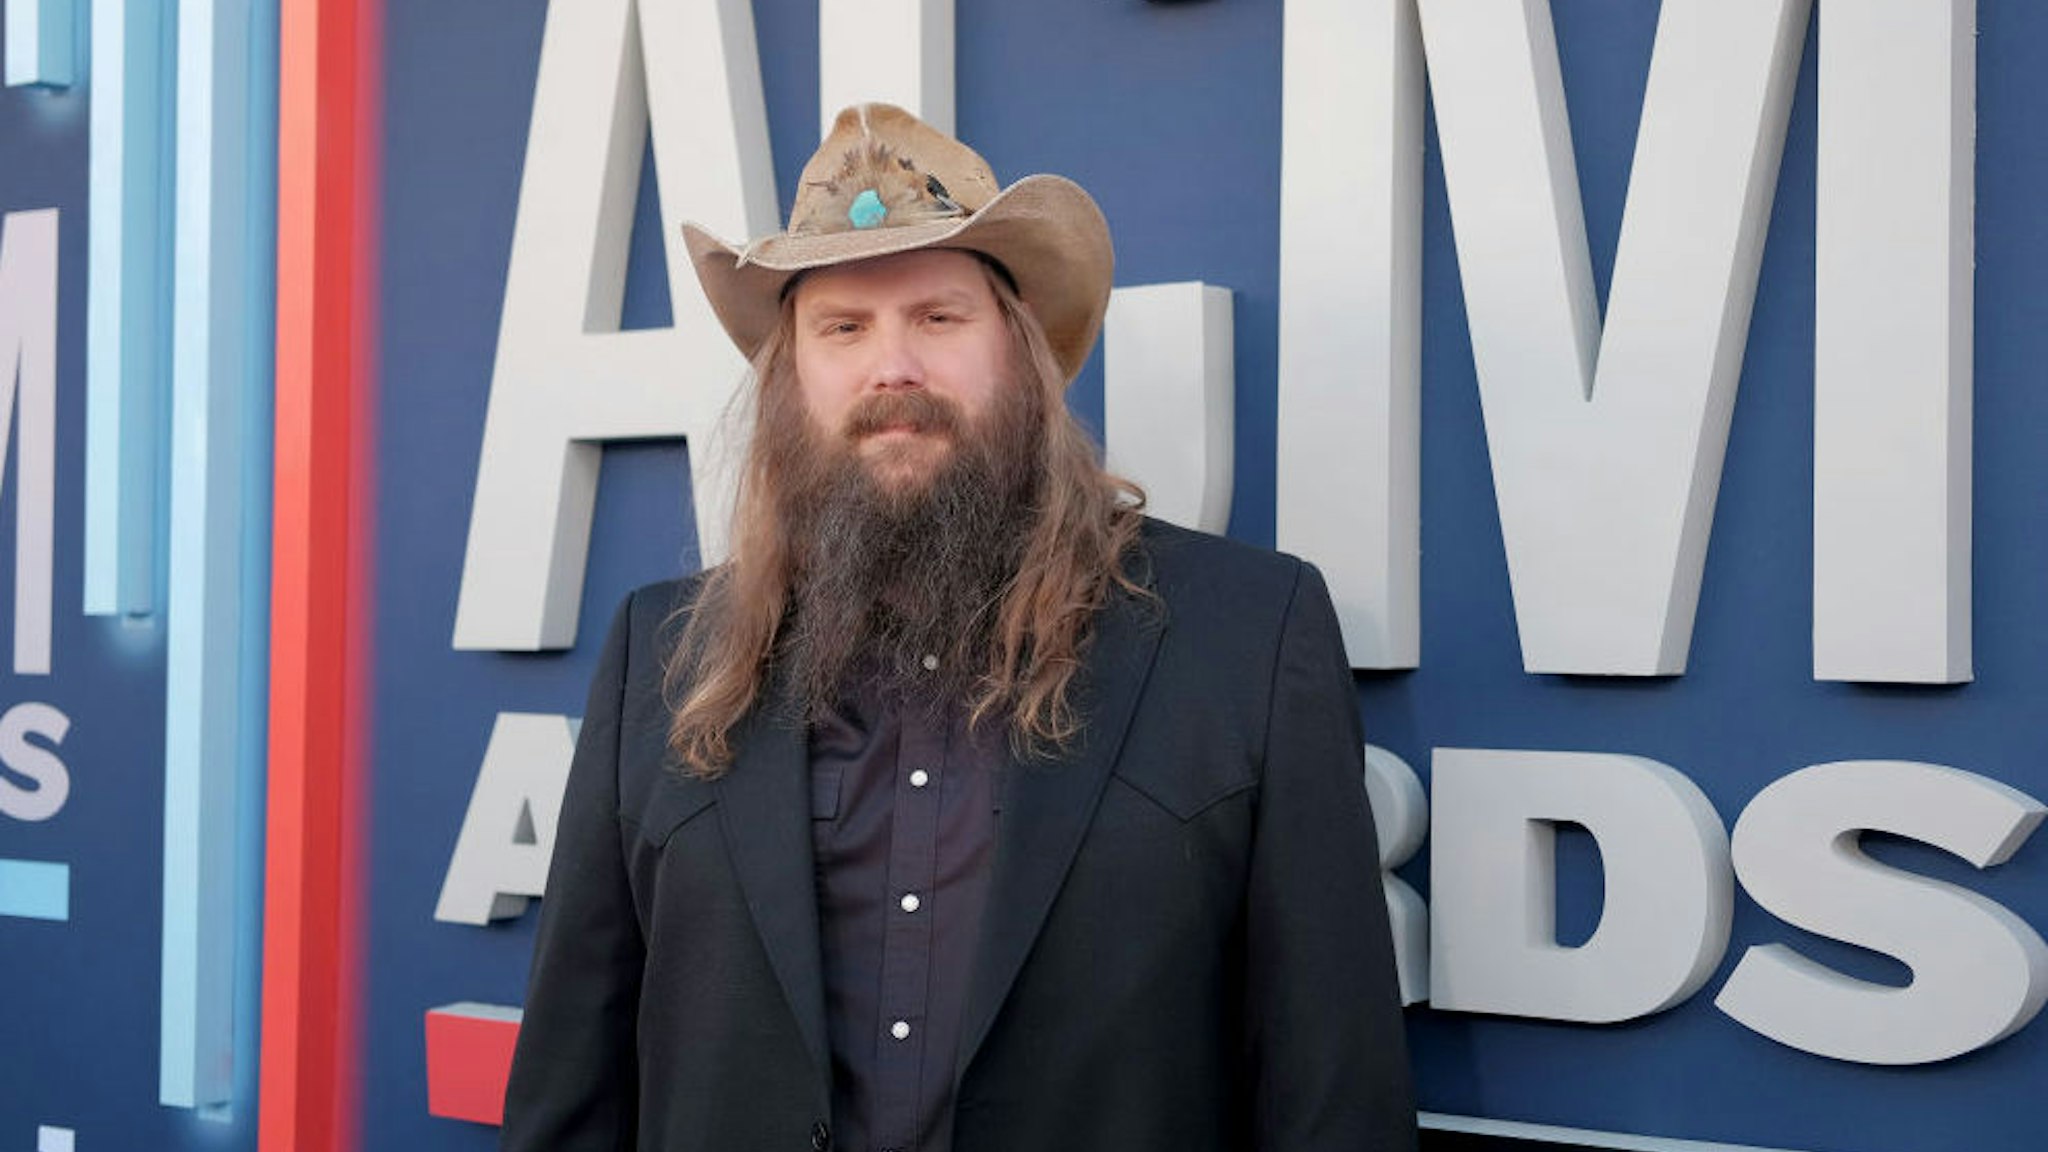 LAS VEGAS, NEVADA - APRIL 07: Chris Stapleton attends the 54th Academy Of Country Music Awards at MGM Grand Garden Arena on April 07, 2019 in Las Vegas, Nevada.